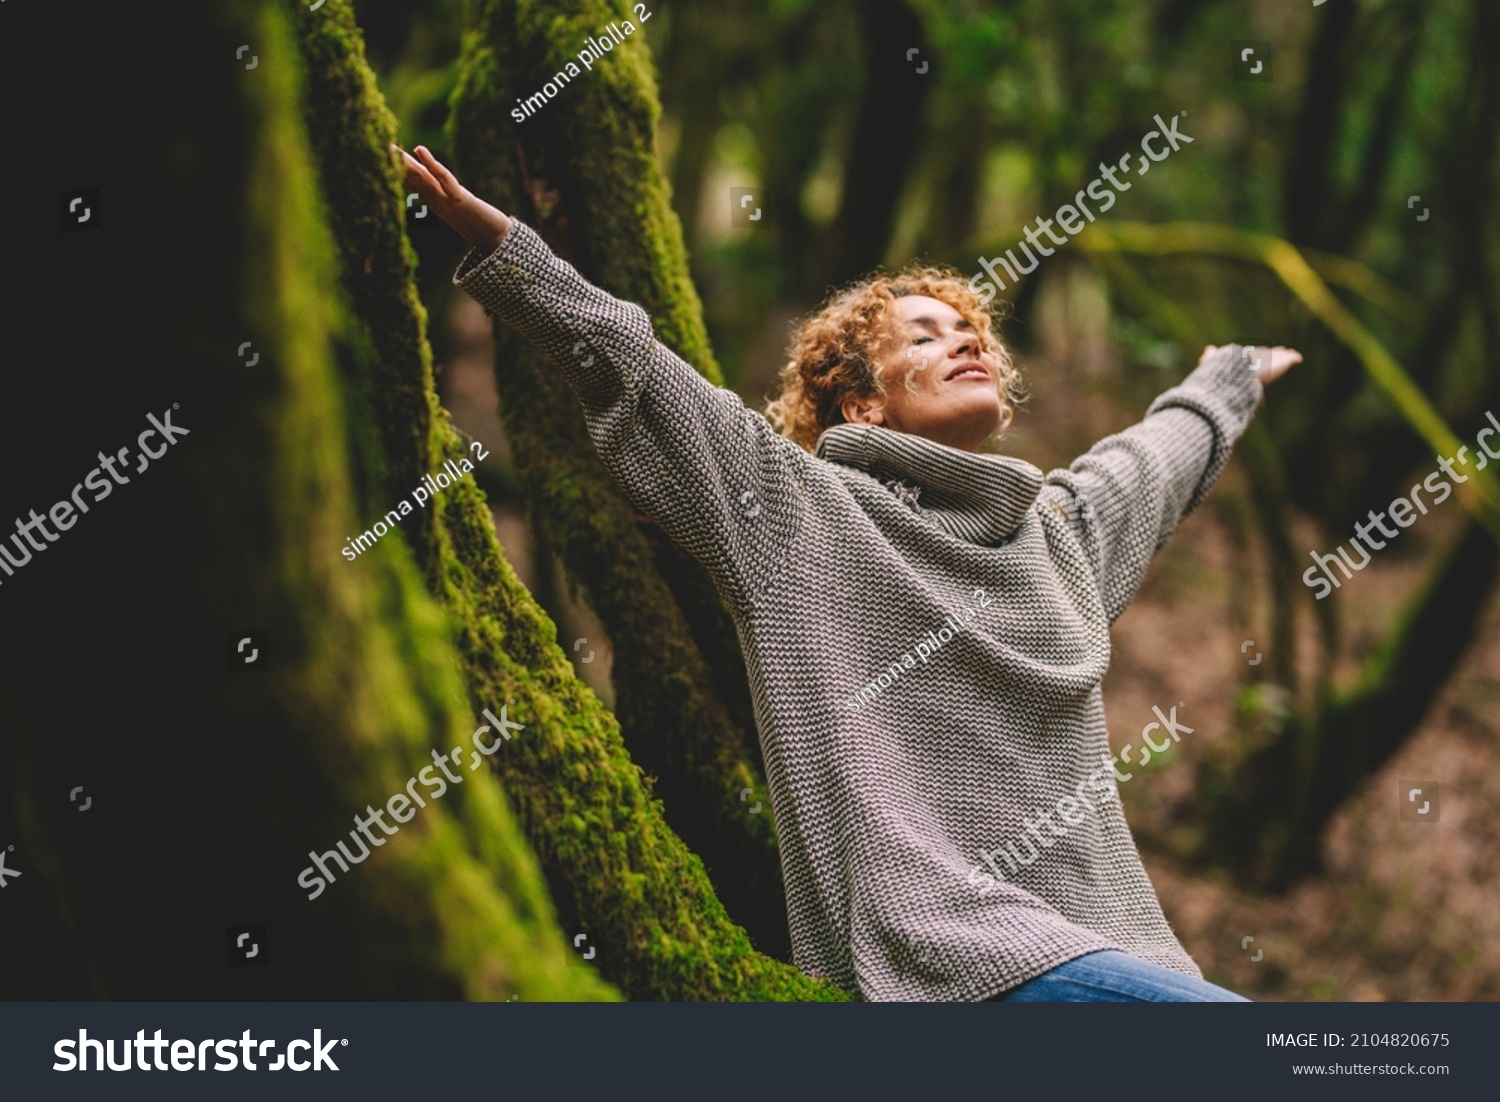 Overjoyed happy woman enjoying the green beautiful nature woods forest around her - concept of female people and healthy natural lifestyle - happiness emotion and adult lady opening arms  #2104820675